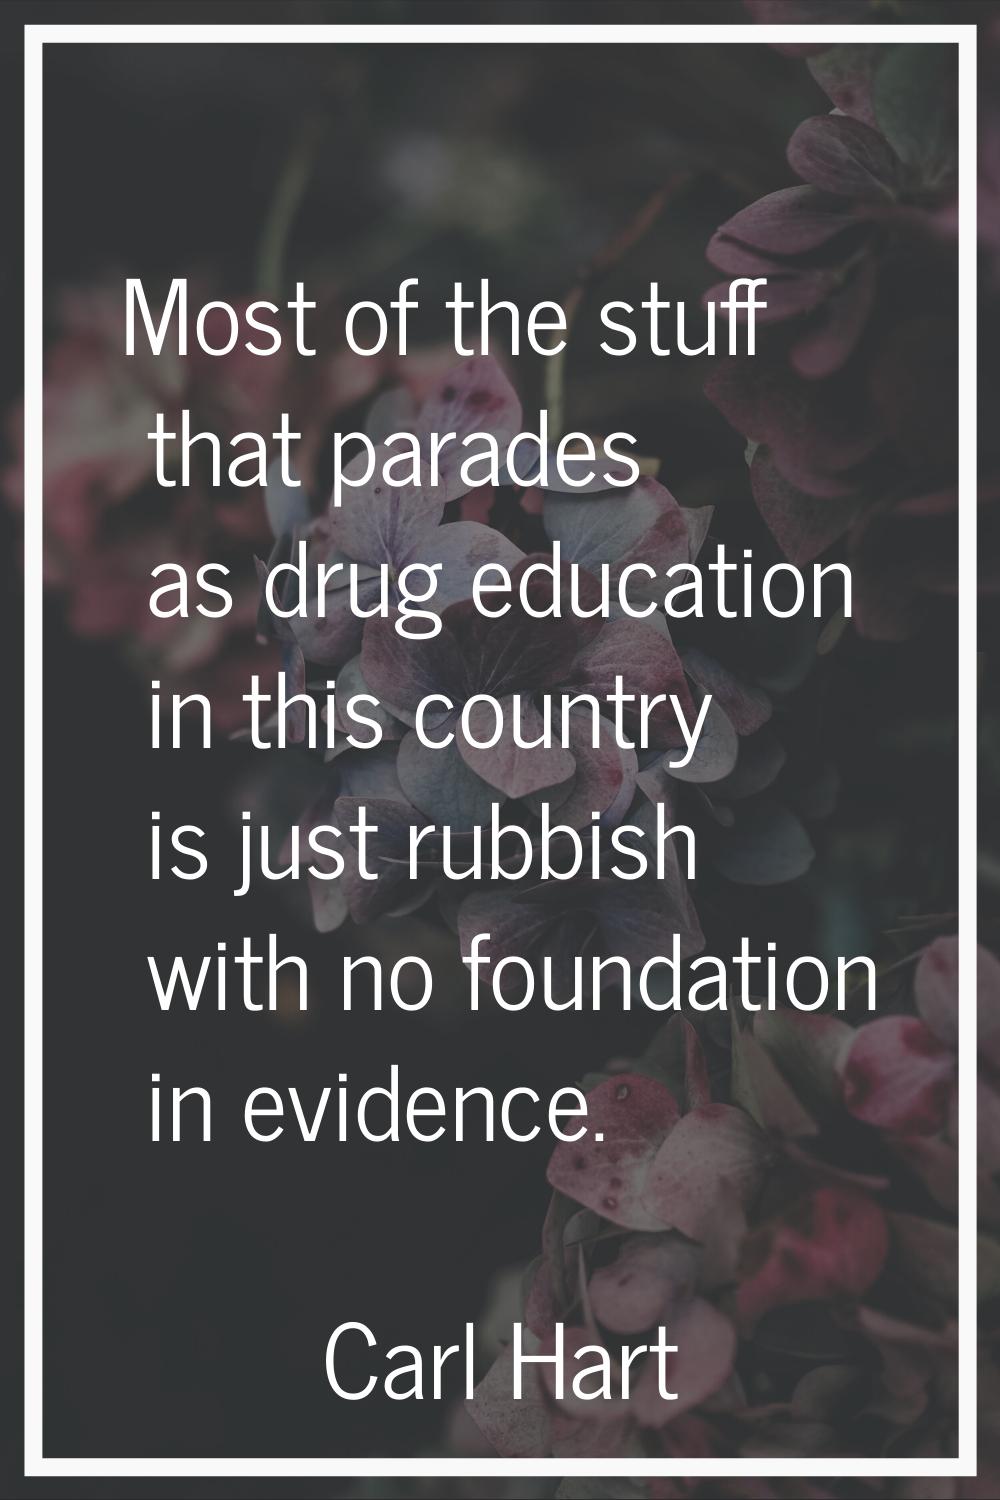 Most of the stuff that parades as drug education in this country is just rubbish with no foundation